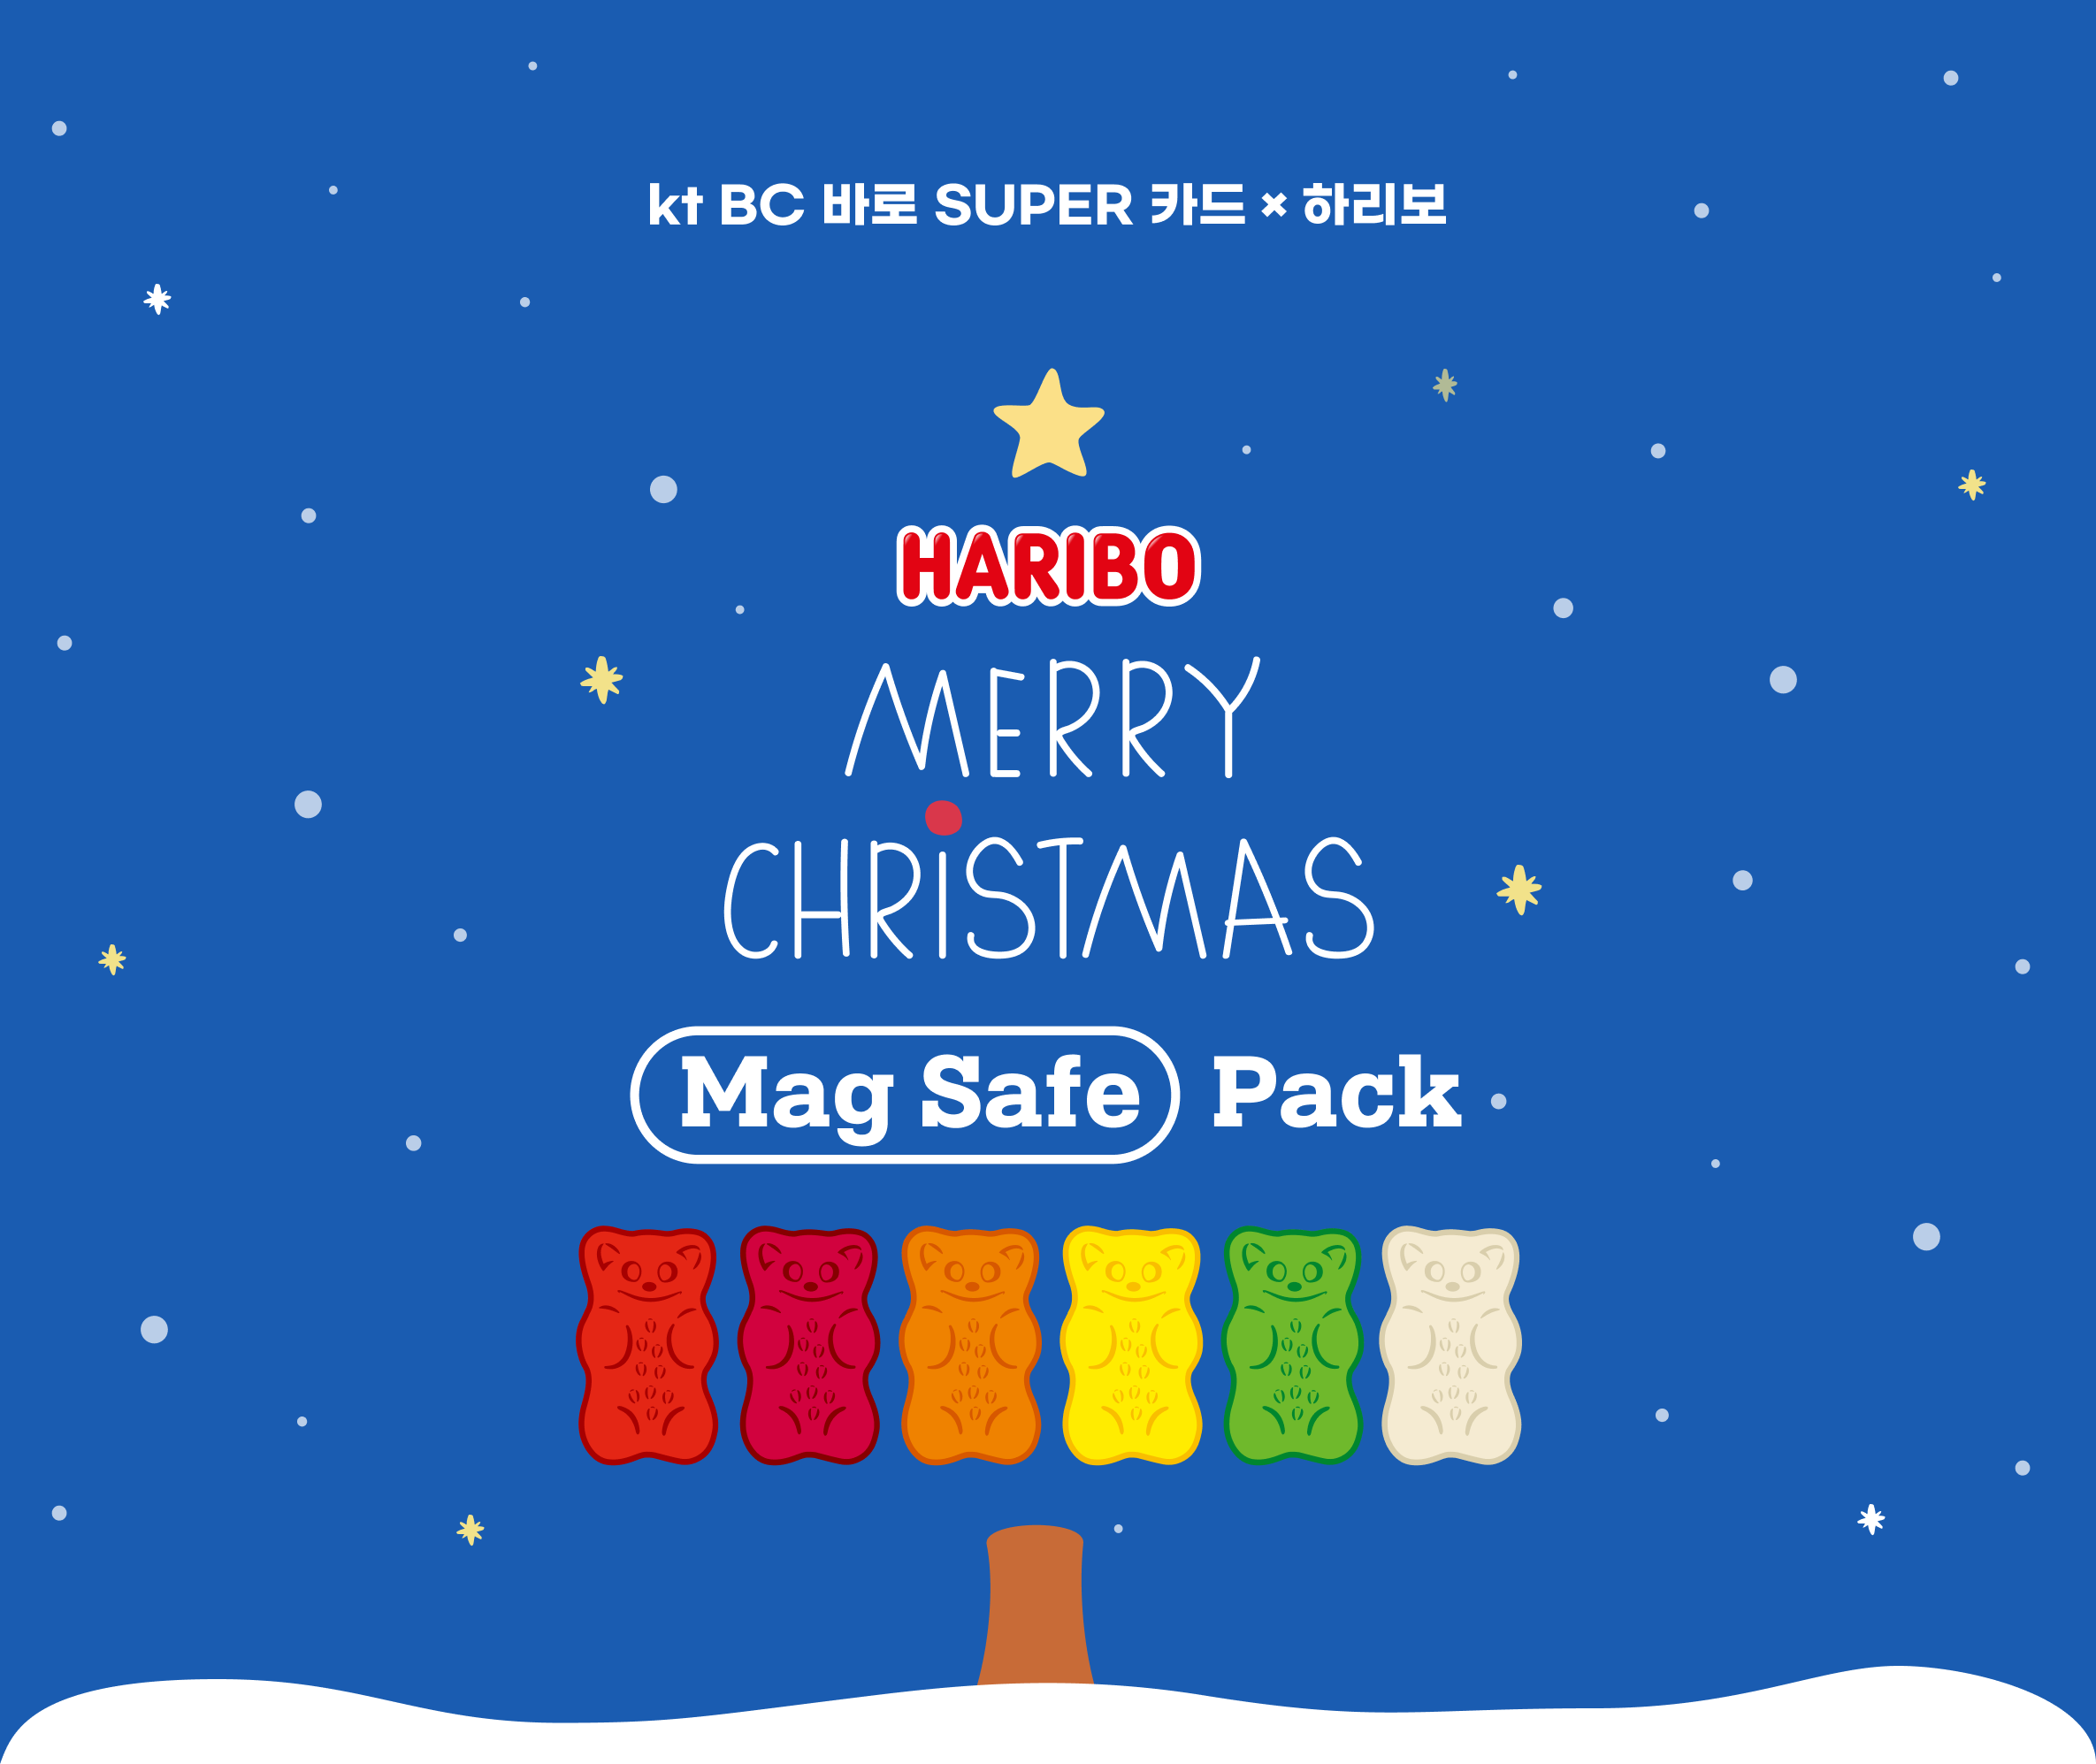 kt BC 바로 SUPER 카드 x 하리보 / HARIBO MERRY CHRISTMAS Mag Safe Pack